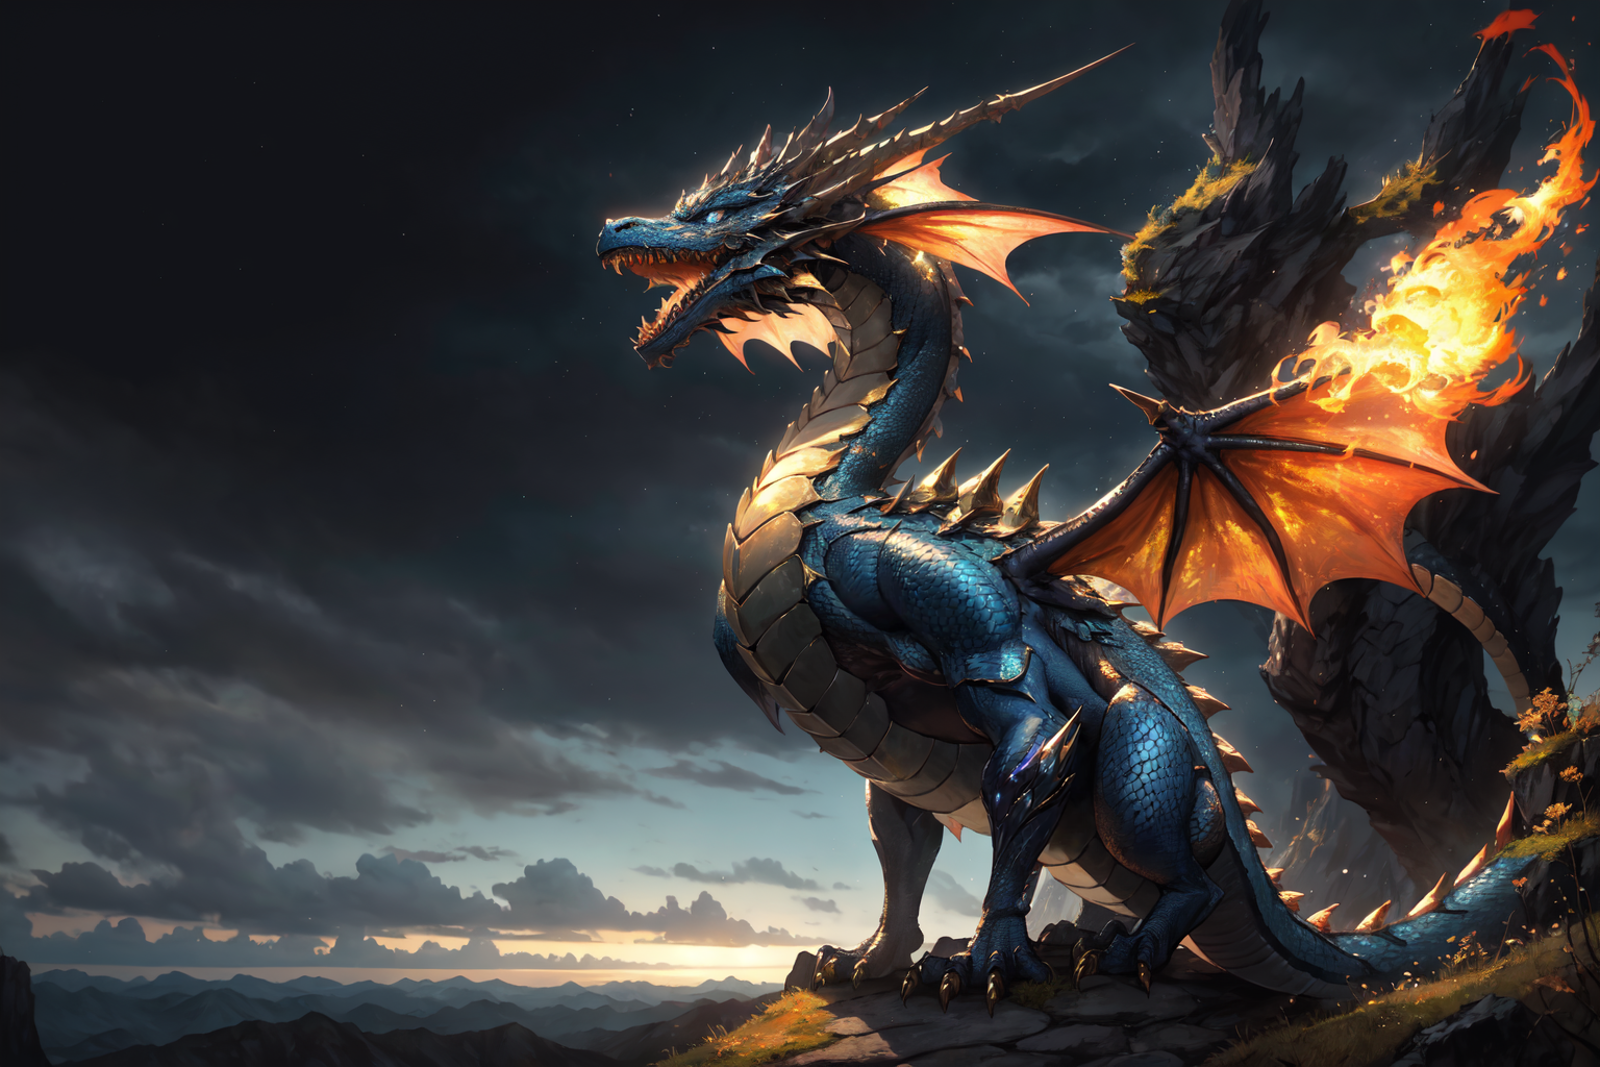 Western Fantasy Dragons image by earthnicity